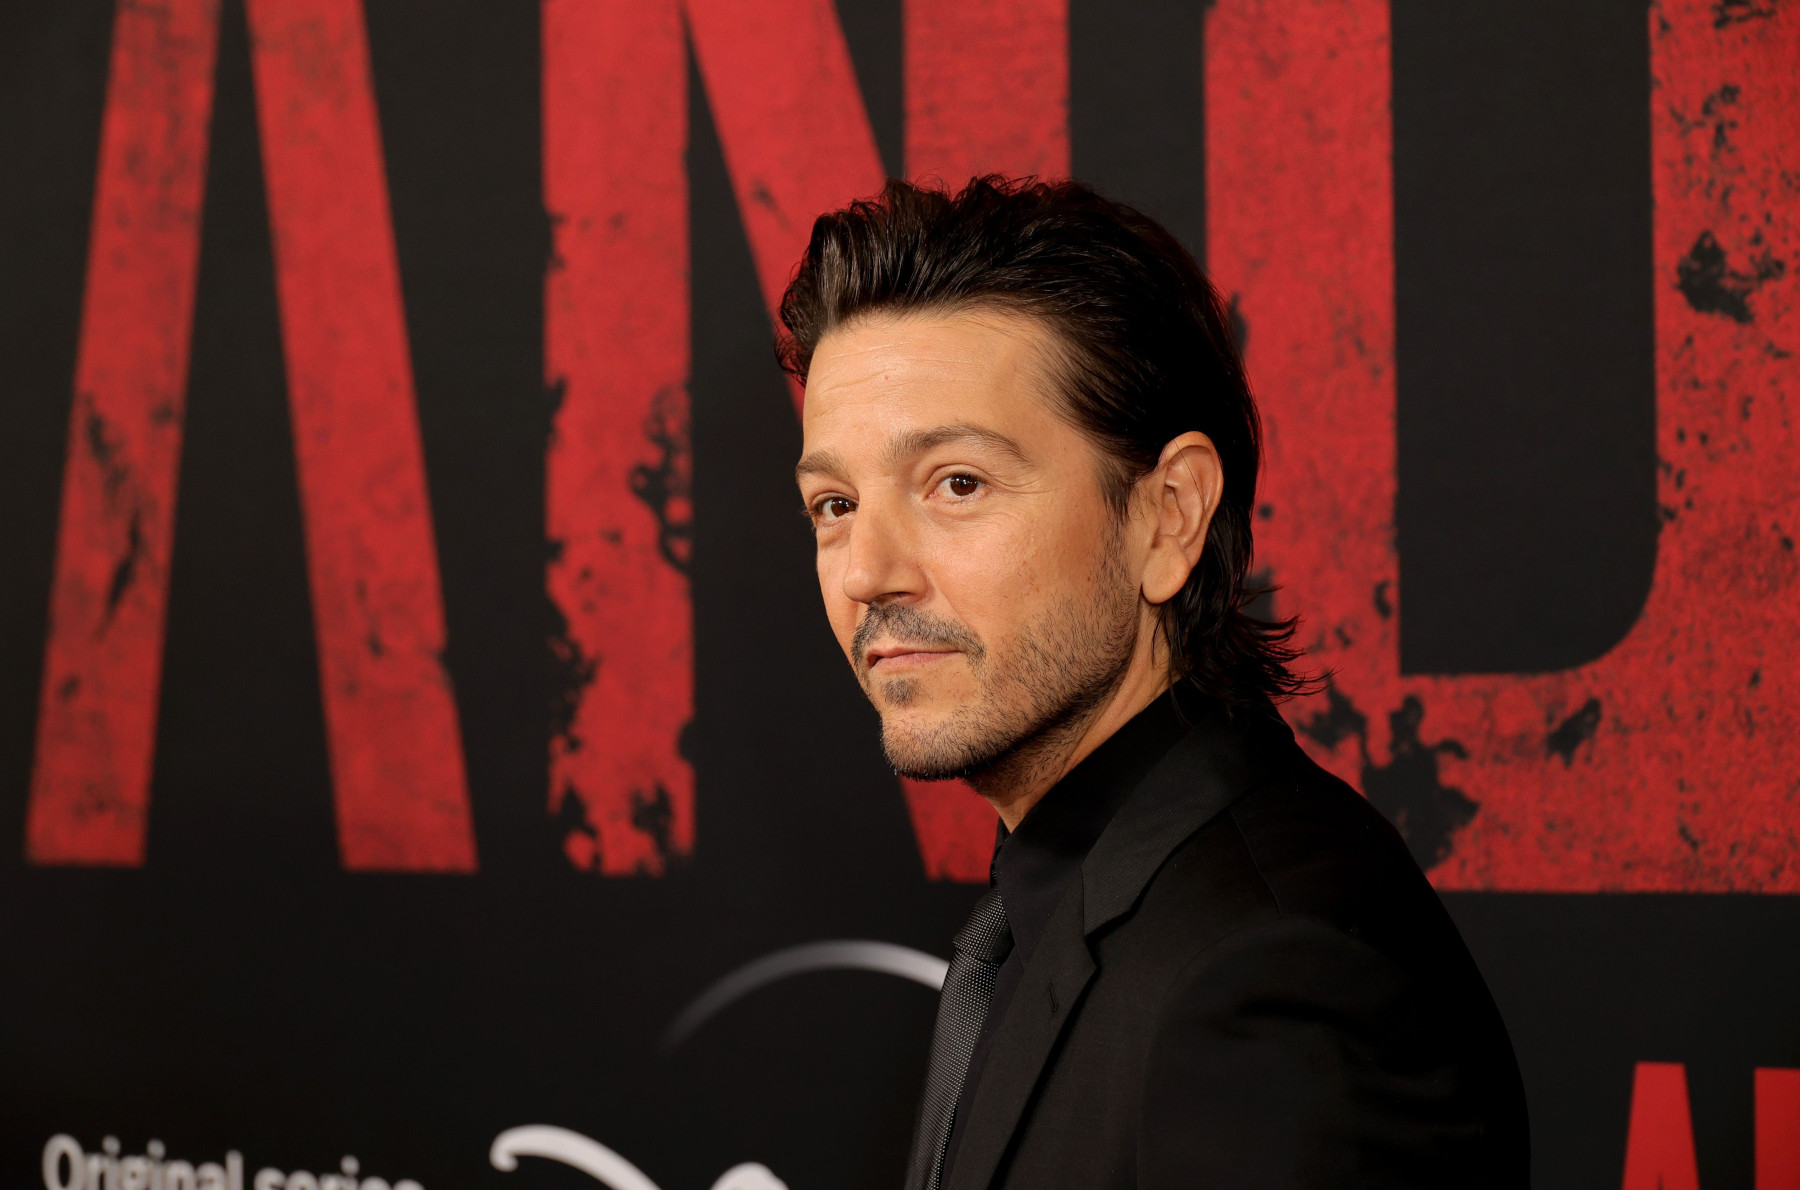 Diego Luna, who headlines 'Star Wars' series 'Andor' on Disney+. In the image, he's standing in front of a wall with the show's logo, wearing a black suit, and has his hair slicked back.